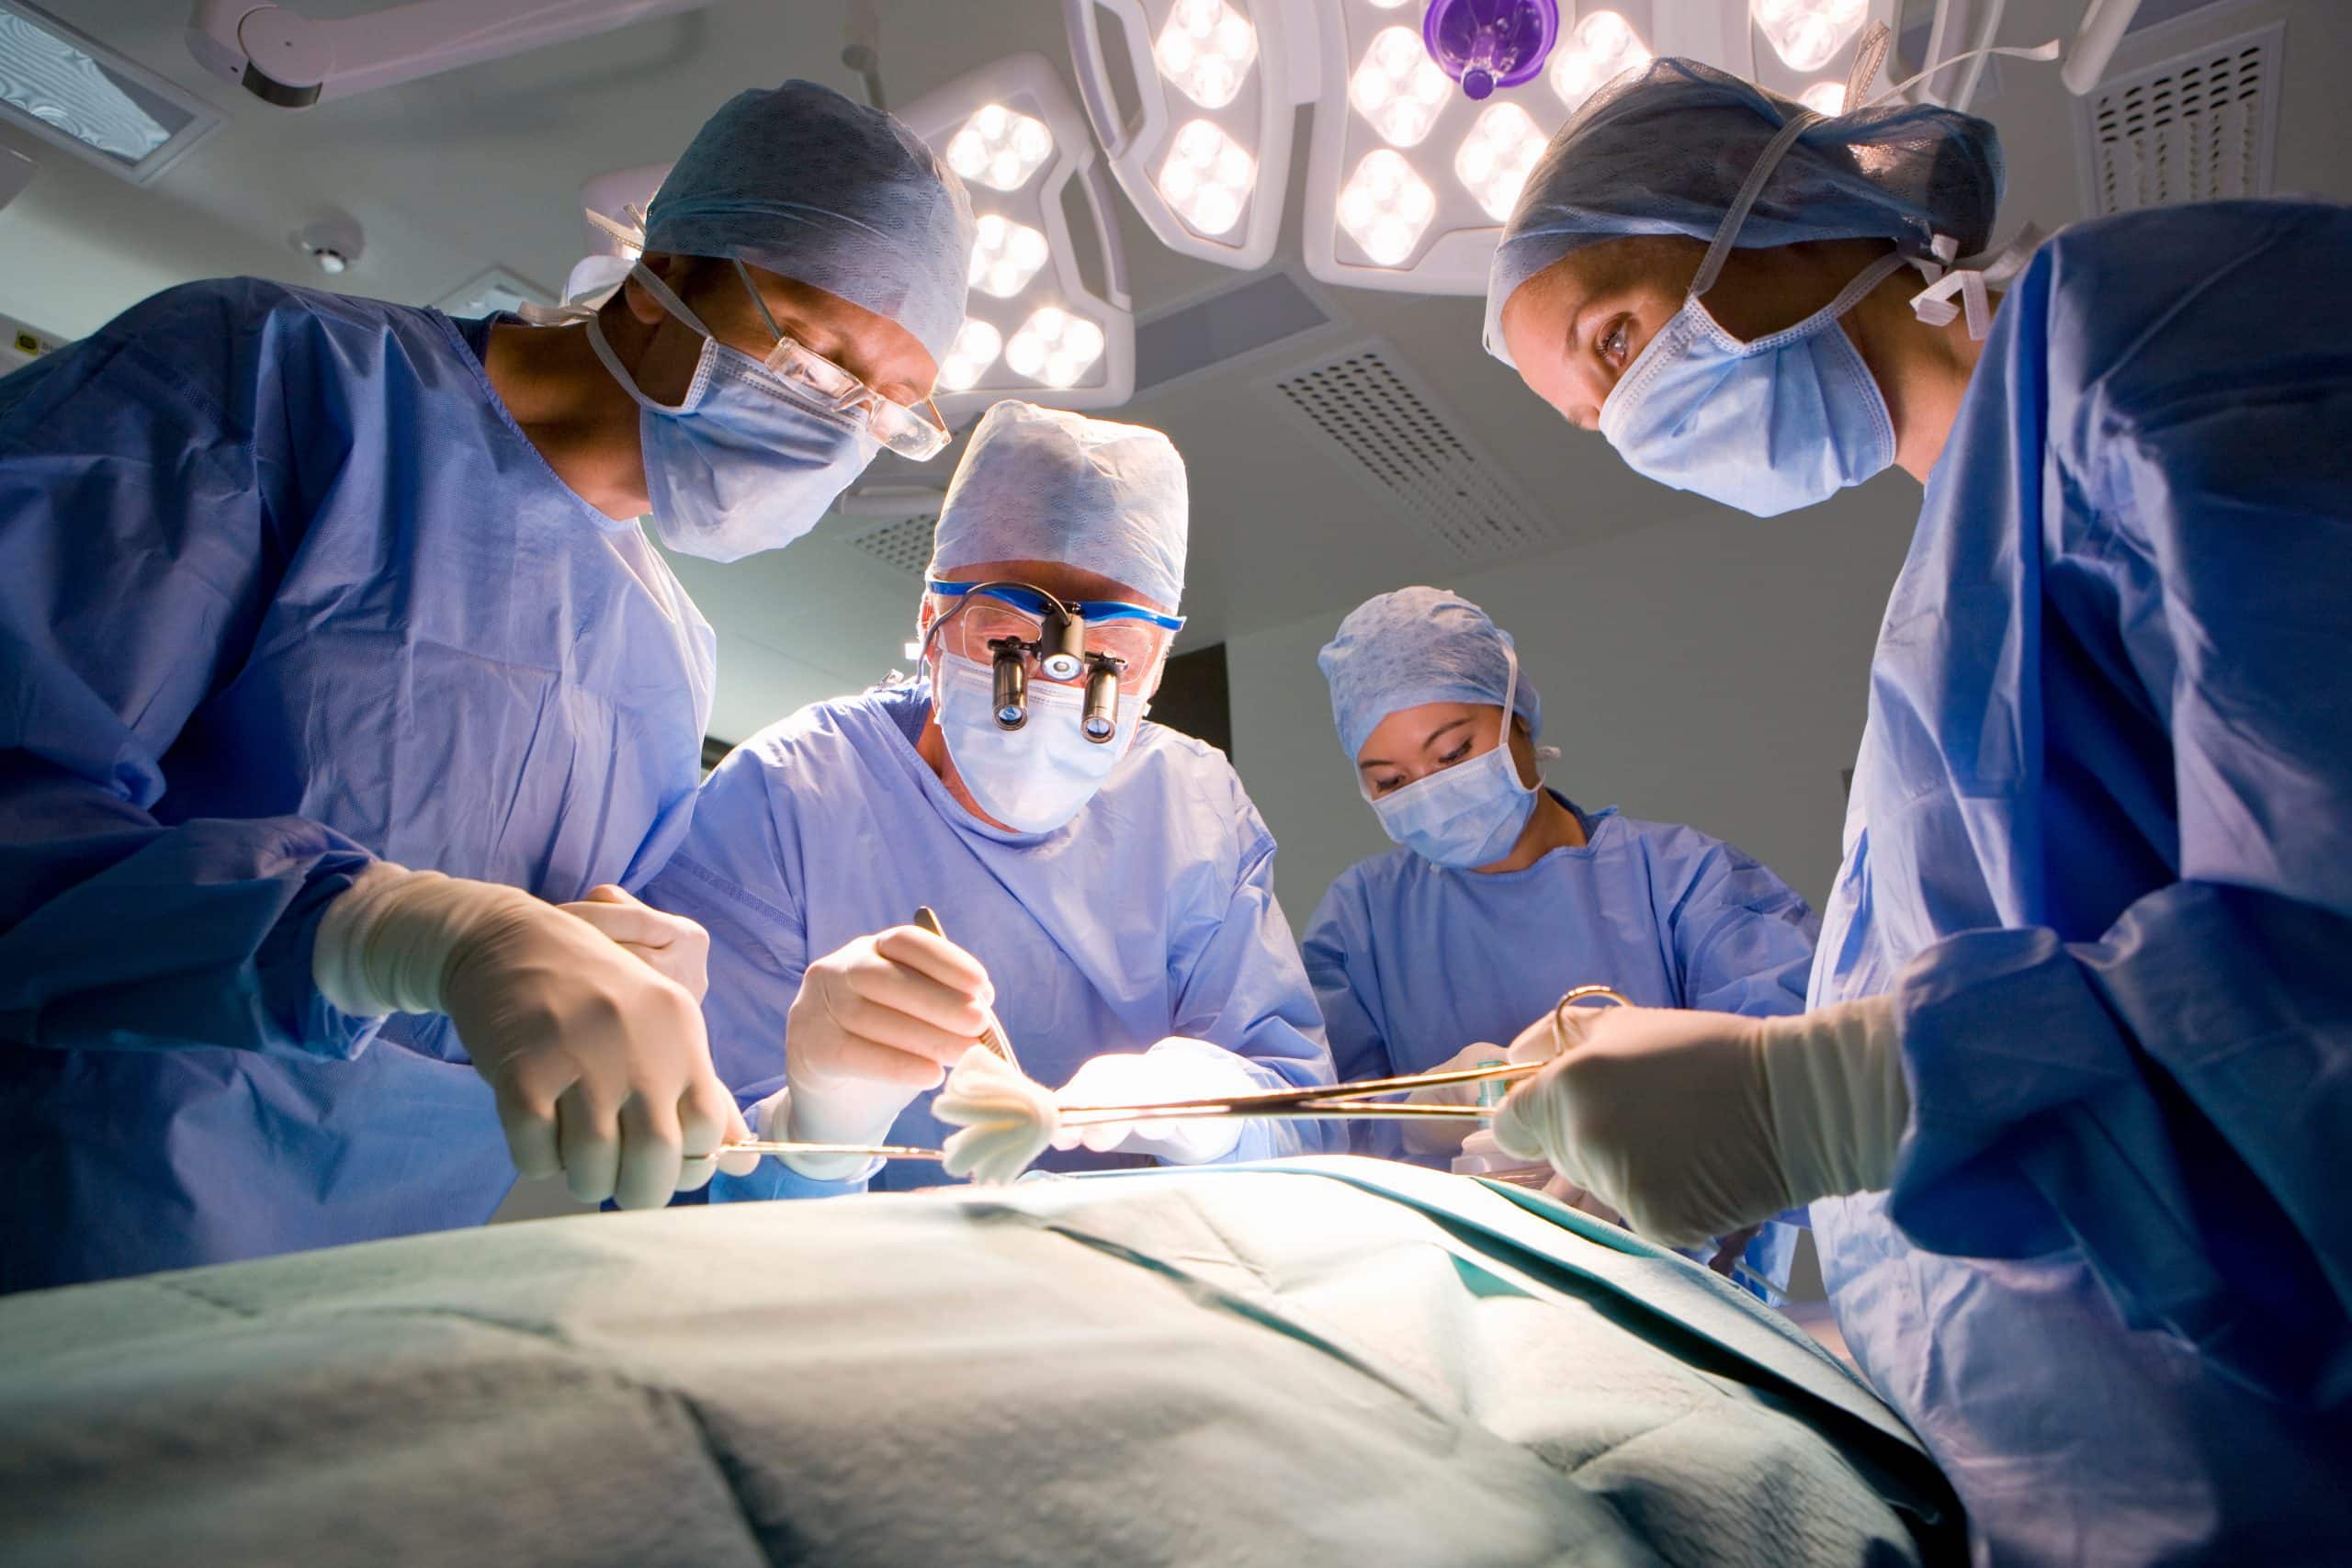 Surgeon and medical staff working on patient in operating room